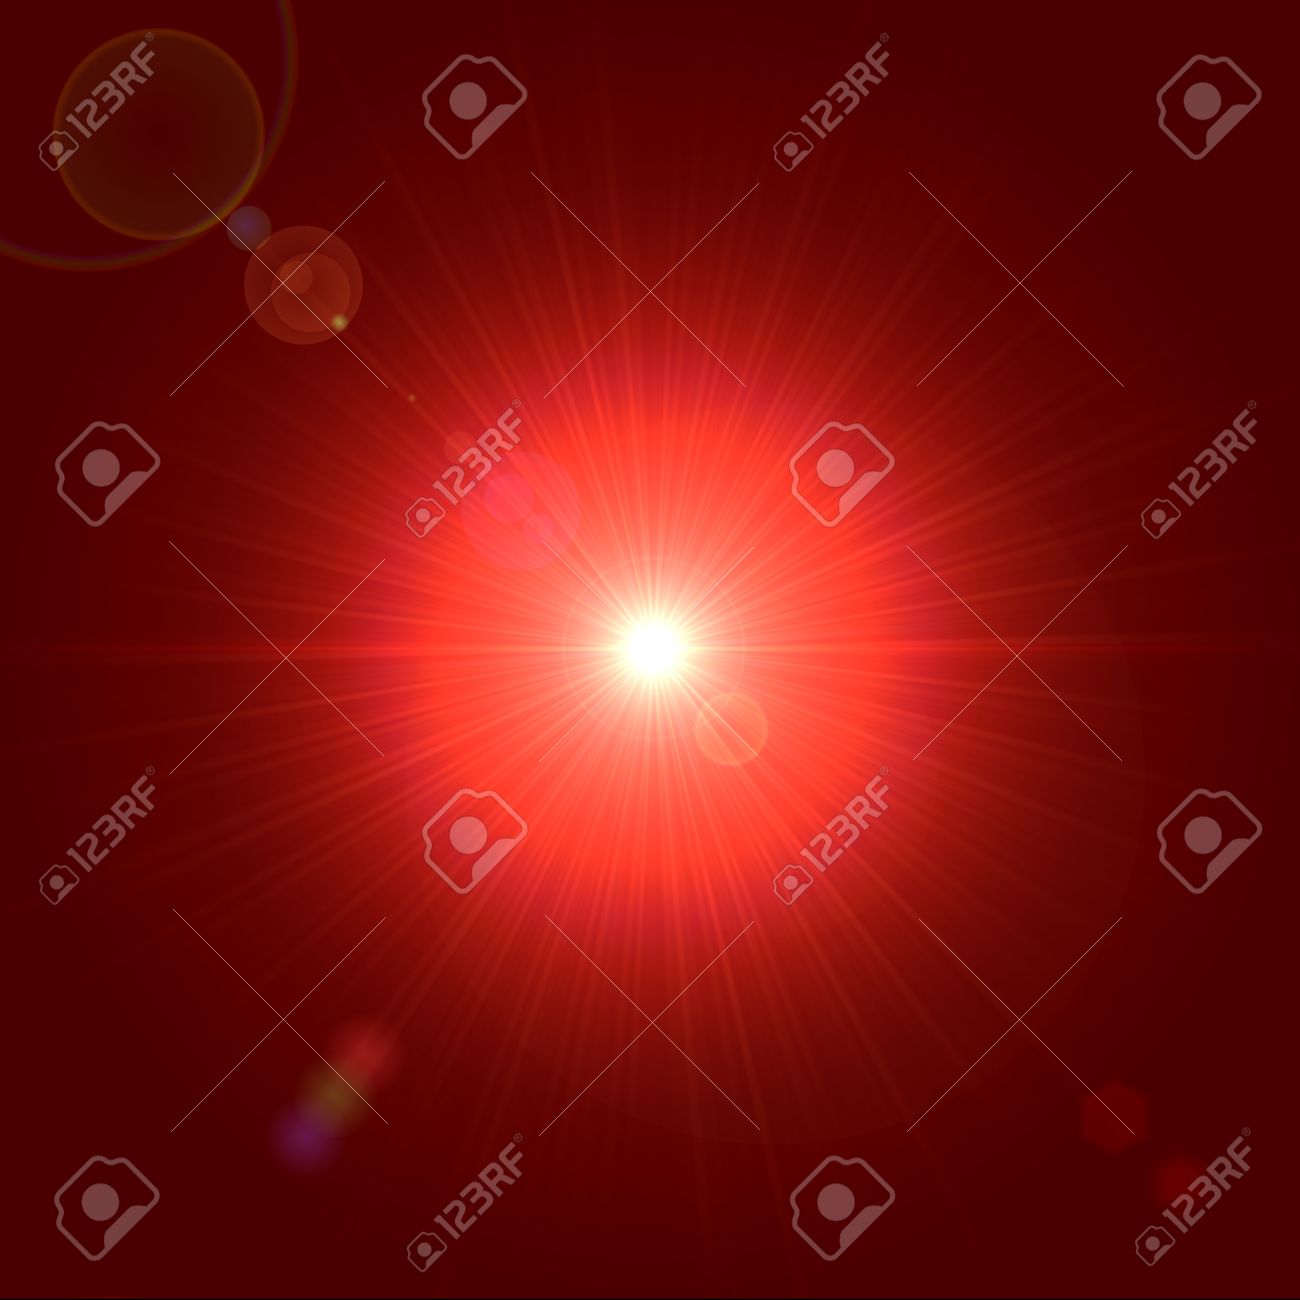 Abstract Lens Flare Light Over Red Background Stock Photo Picture